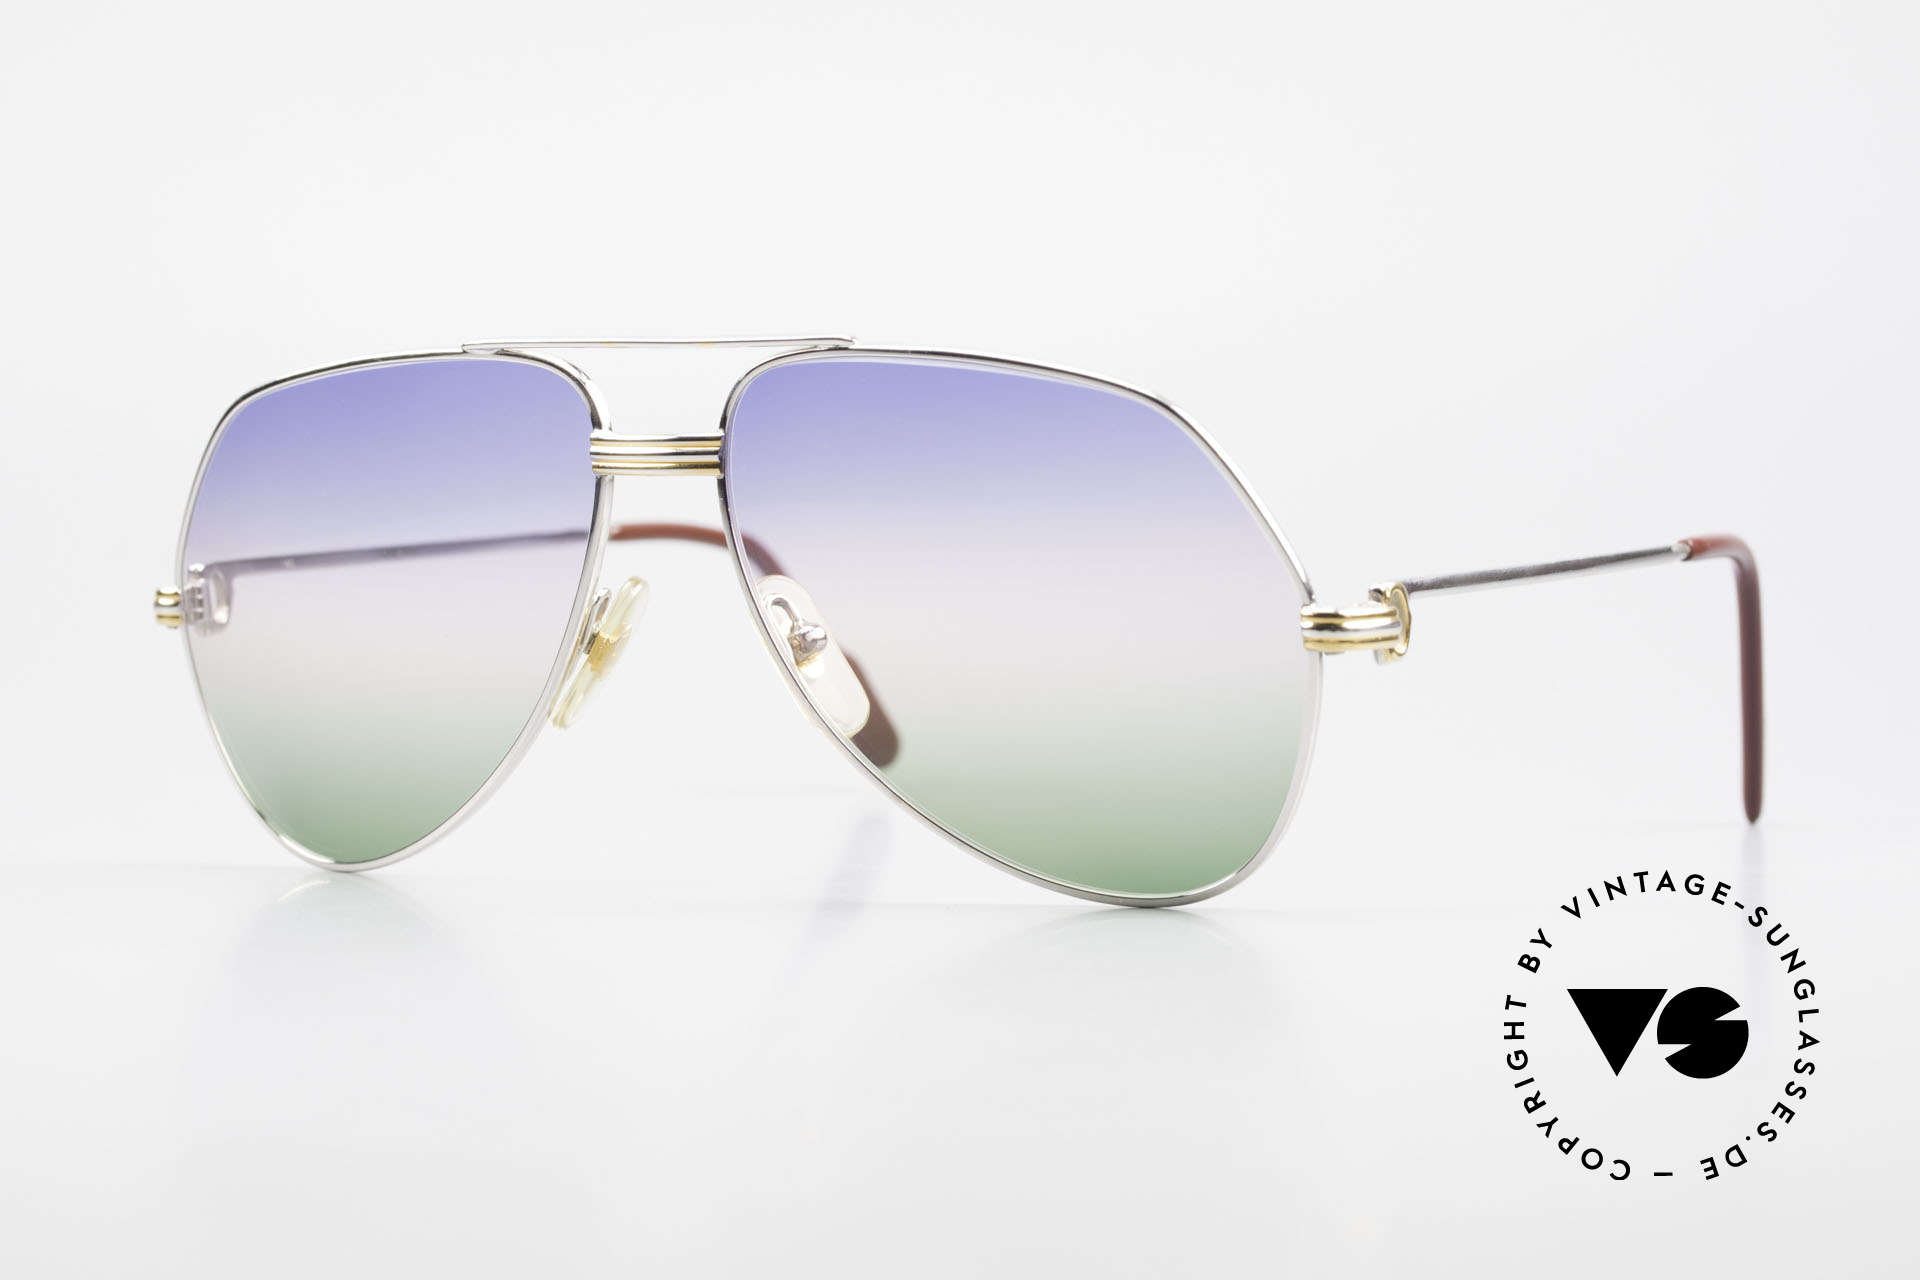 Cartier Vendome LC - M Platinum 80's Shades Aviator, Vendome = the most famous eyewear design by CARTIER, Made for Men